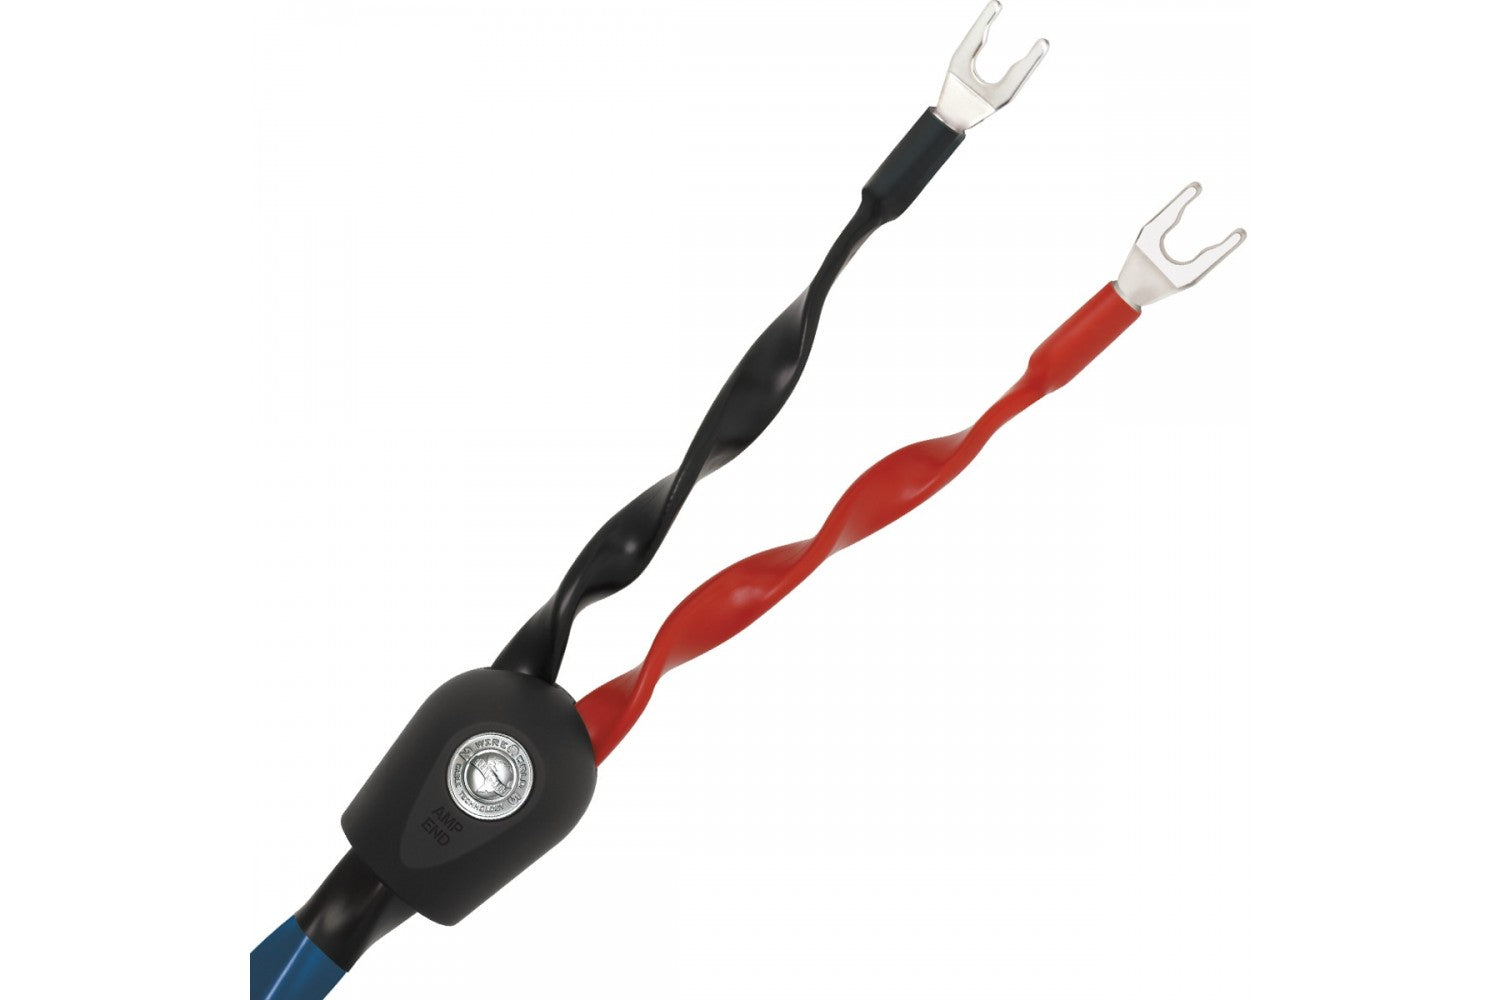 Wireworld OASIS 8 Speaker Cable is available at Vinyl Sound. Best price on Wireworld Speaker Cables - Wireworld's audio speaker cables - Wireworld Digital Audio Cables - balanced and coaxial audio cables - Patented Wireworld audio interconnect cables - Wireworld power cables...